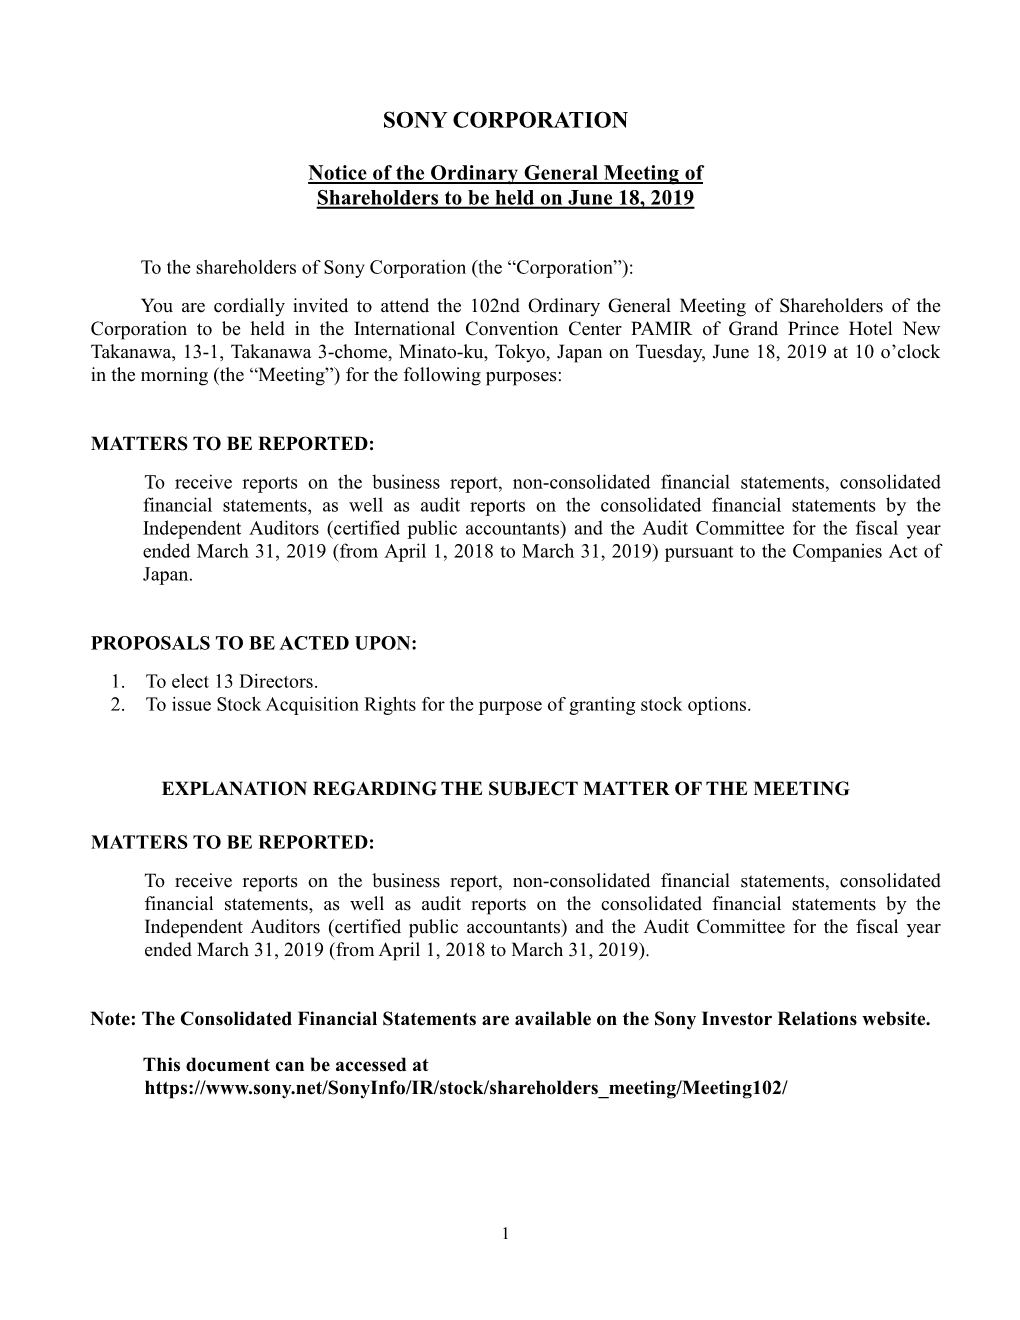 Notice of the Ordinary General Meeting of Shareholders to Be Held on June 18, 2019